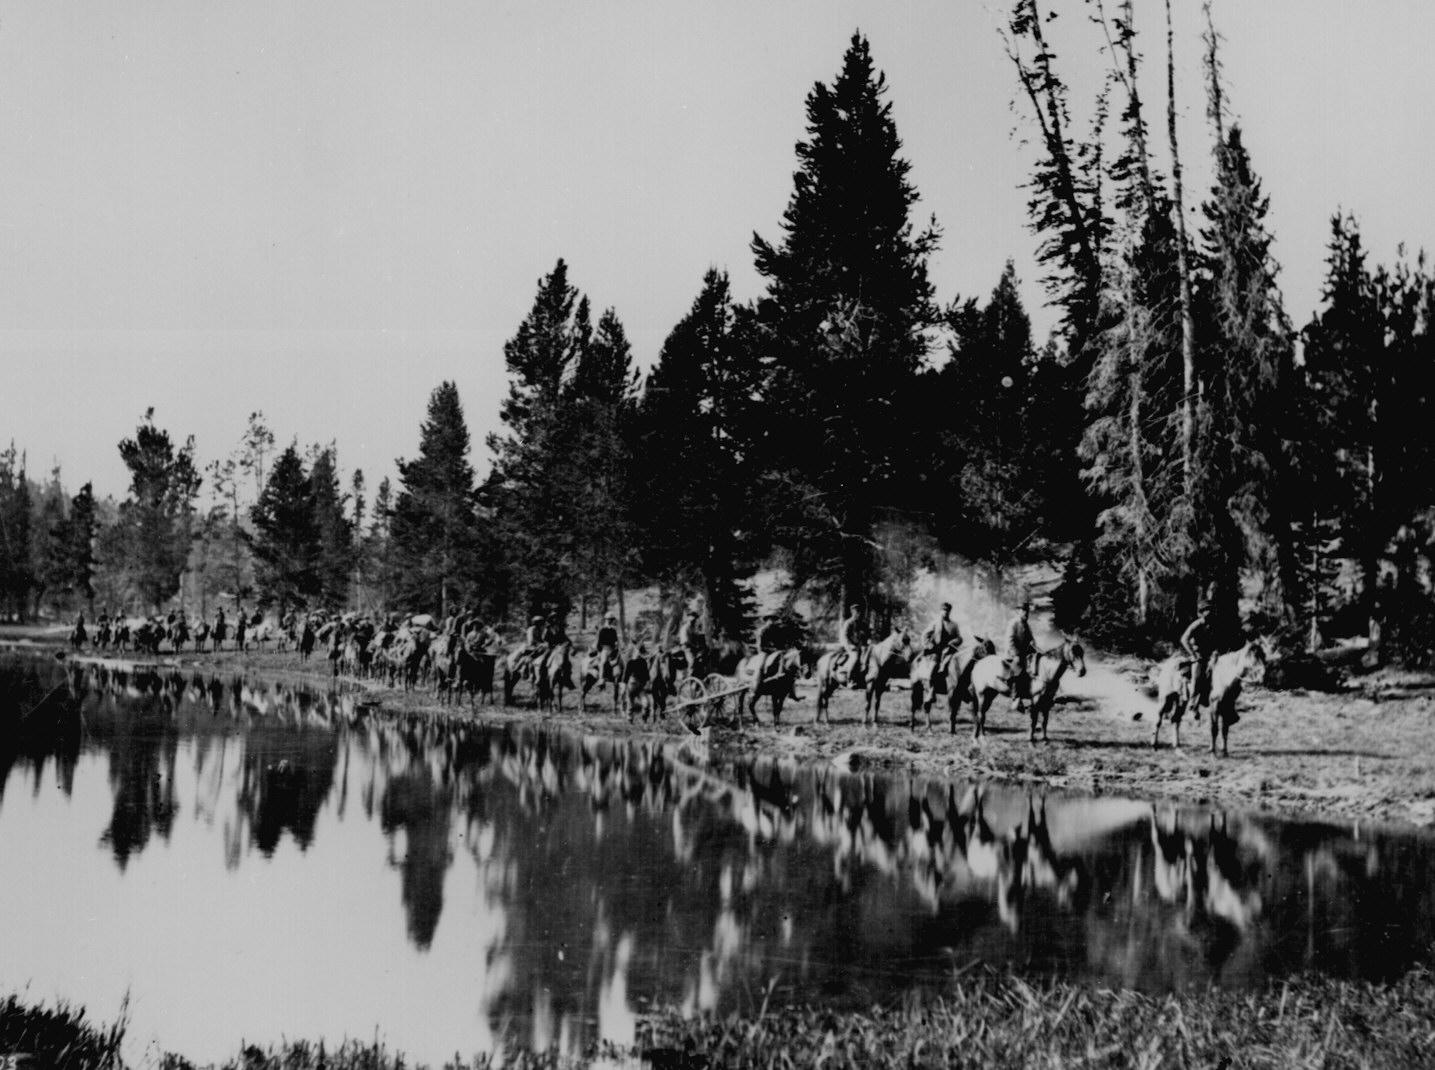 The U.S. Geological and Geophysical Survey of the Territories, conducted by Hayden, en route with pack train upon the trail between the Yellowstone and East Fork Rivers “showing the manner in which all parties traverse these wilds.